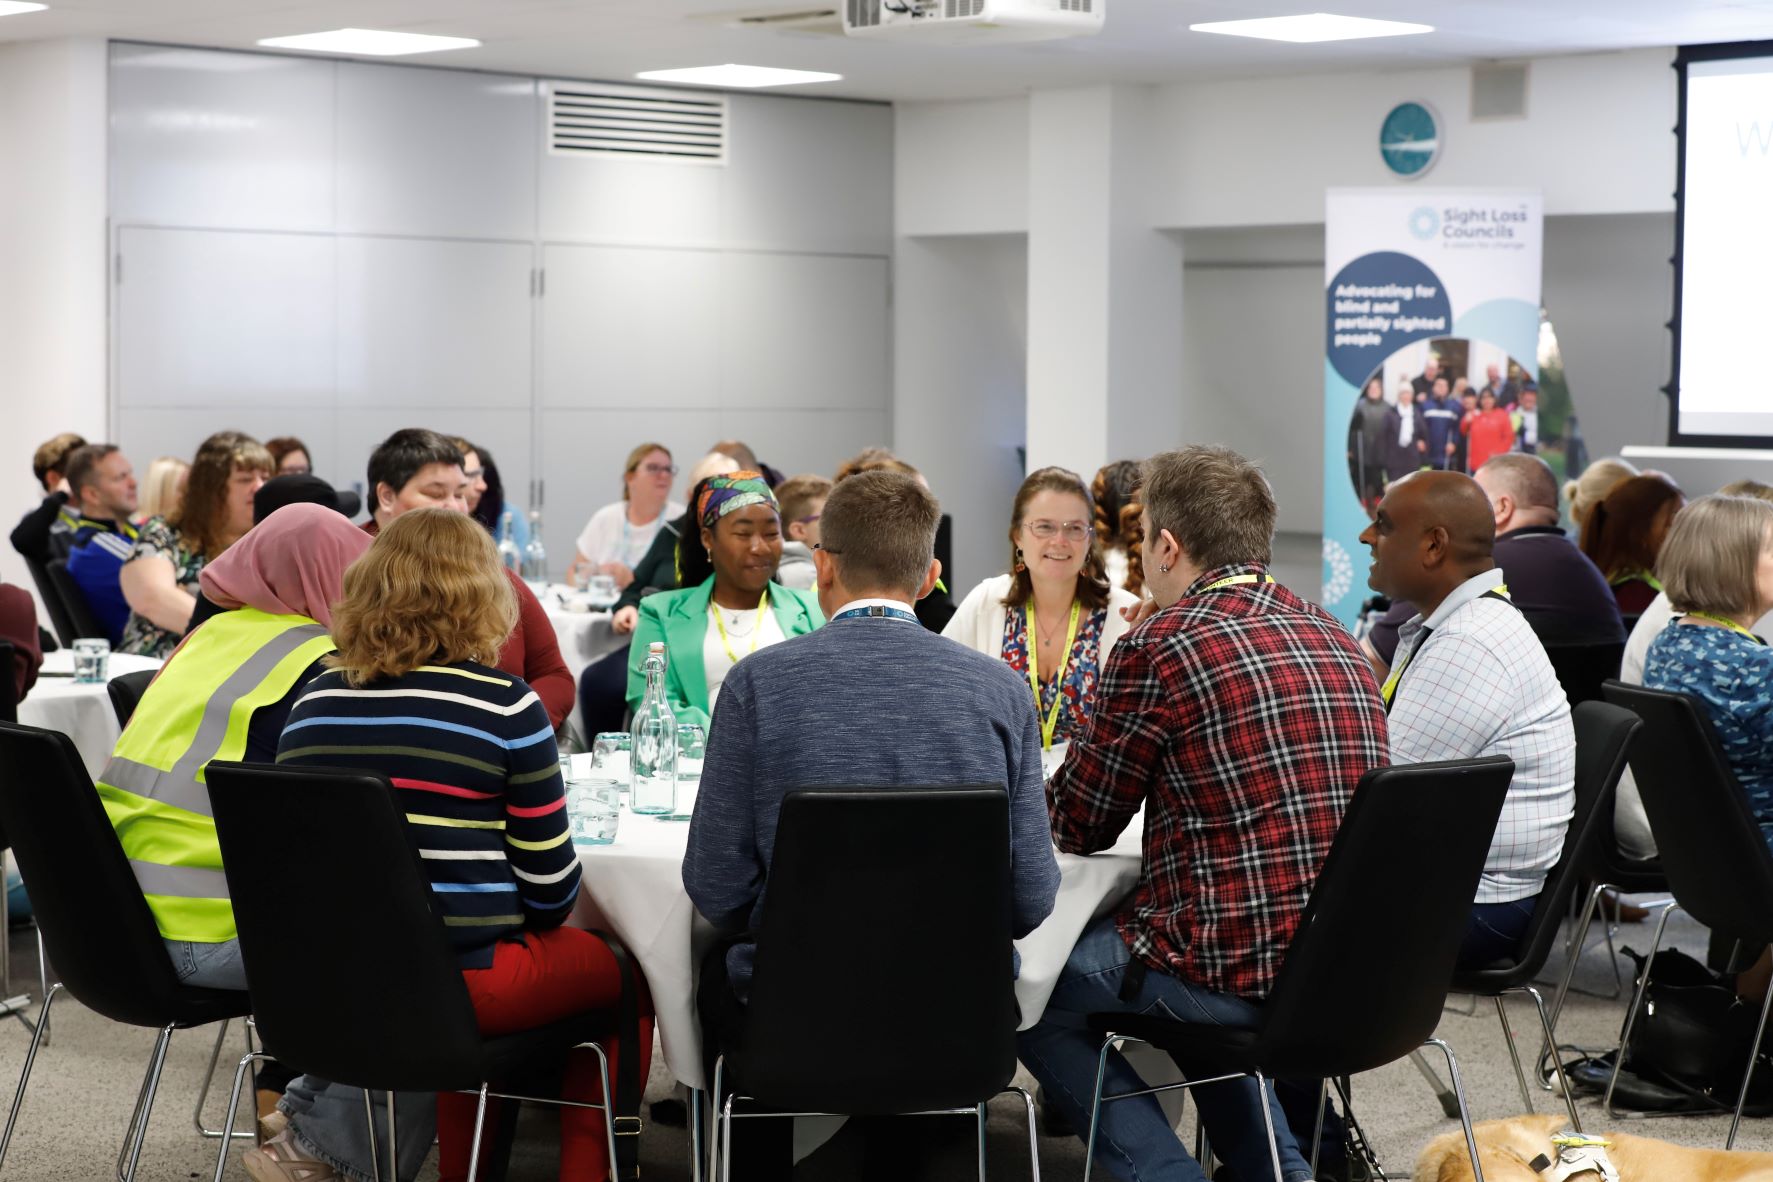 : Blind and partially sighted volunteers are sat around circular tables having a discussion at a volunteer event. A Sight Loss Council banner is in the background.